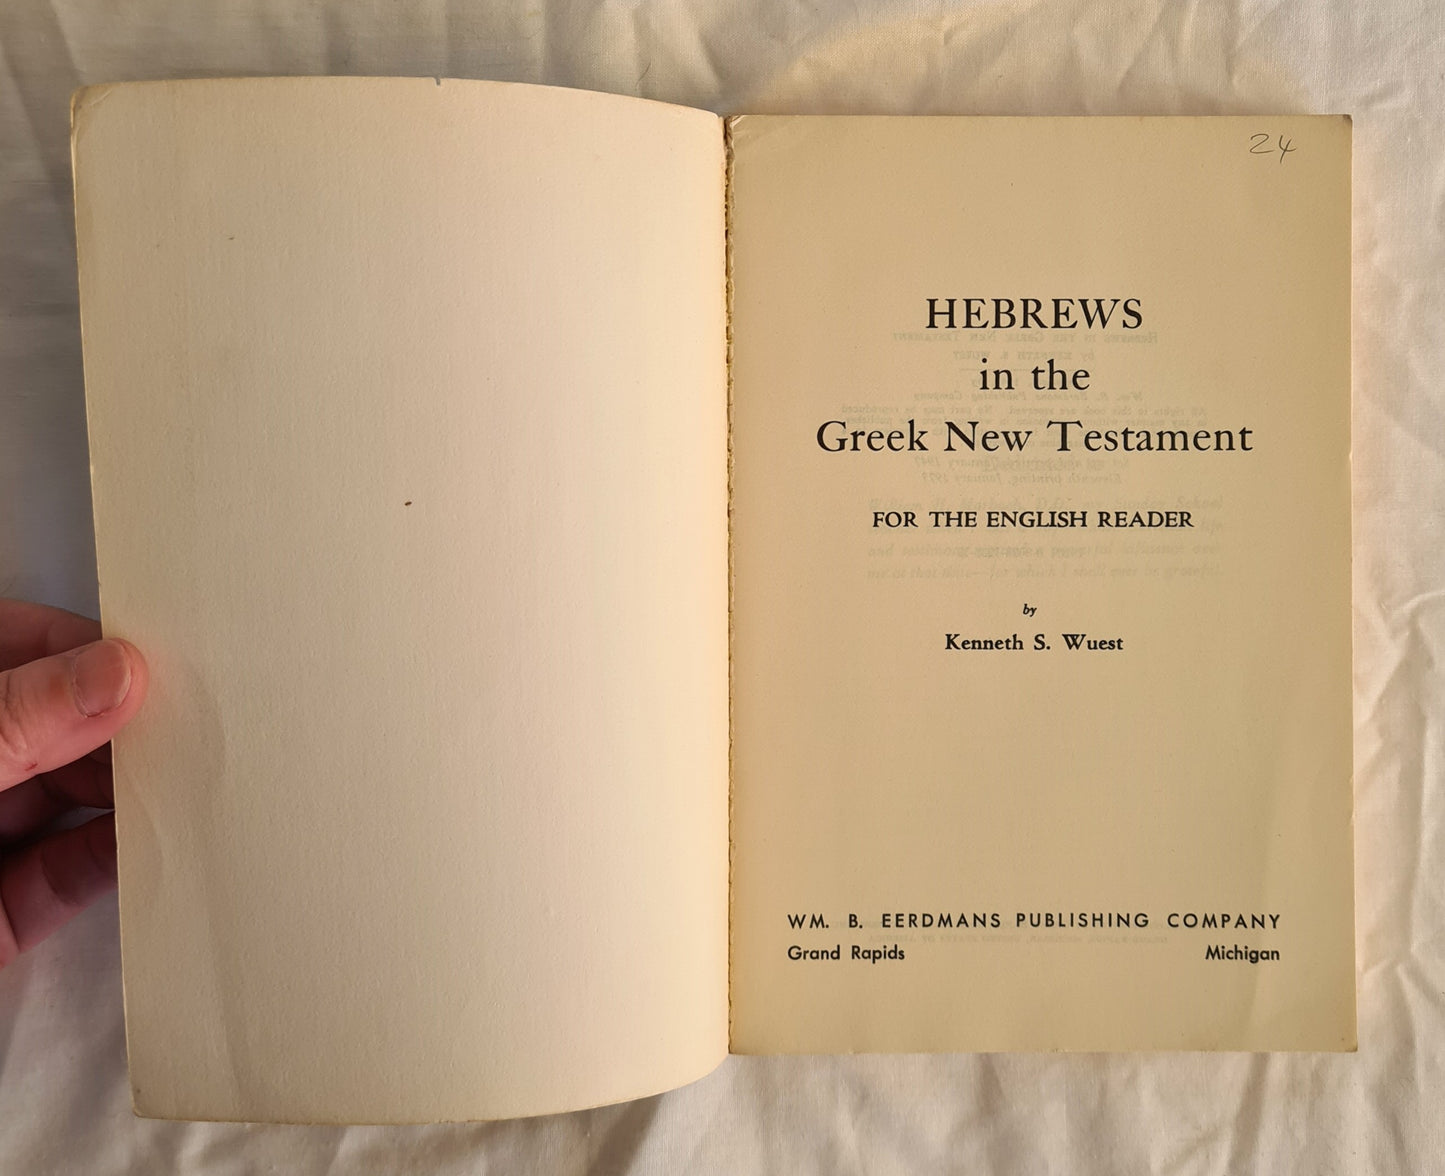 Hebrews in the Greek New Testament by Kenneth S. Wuest